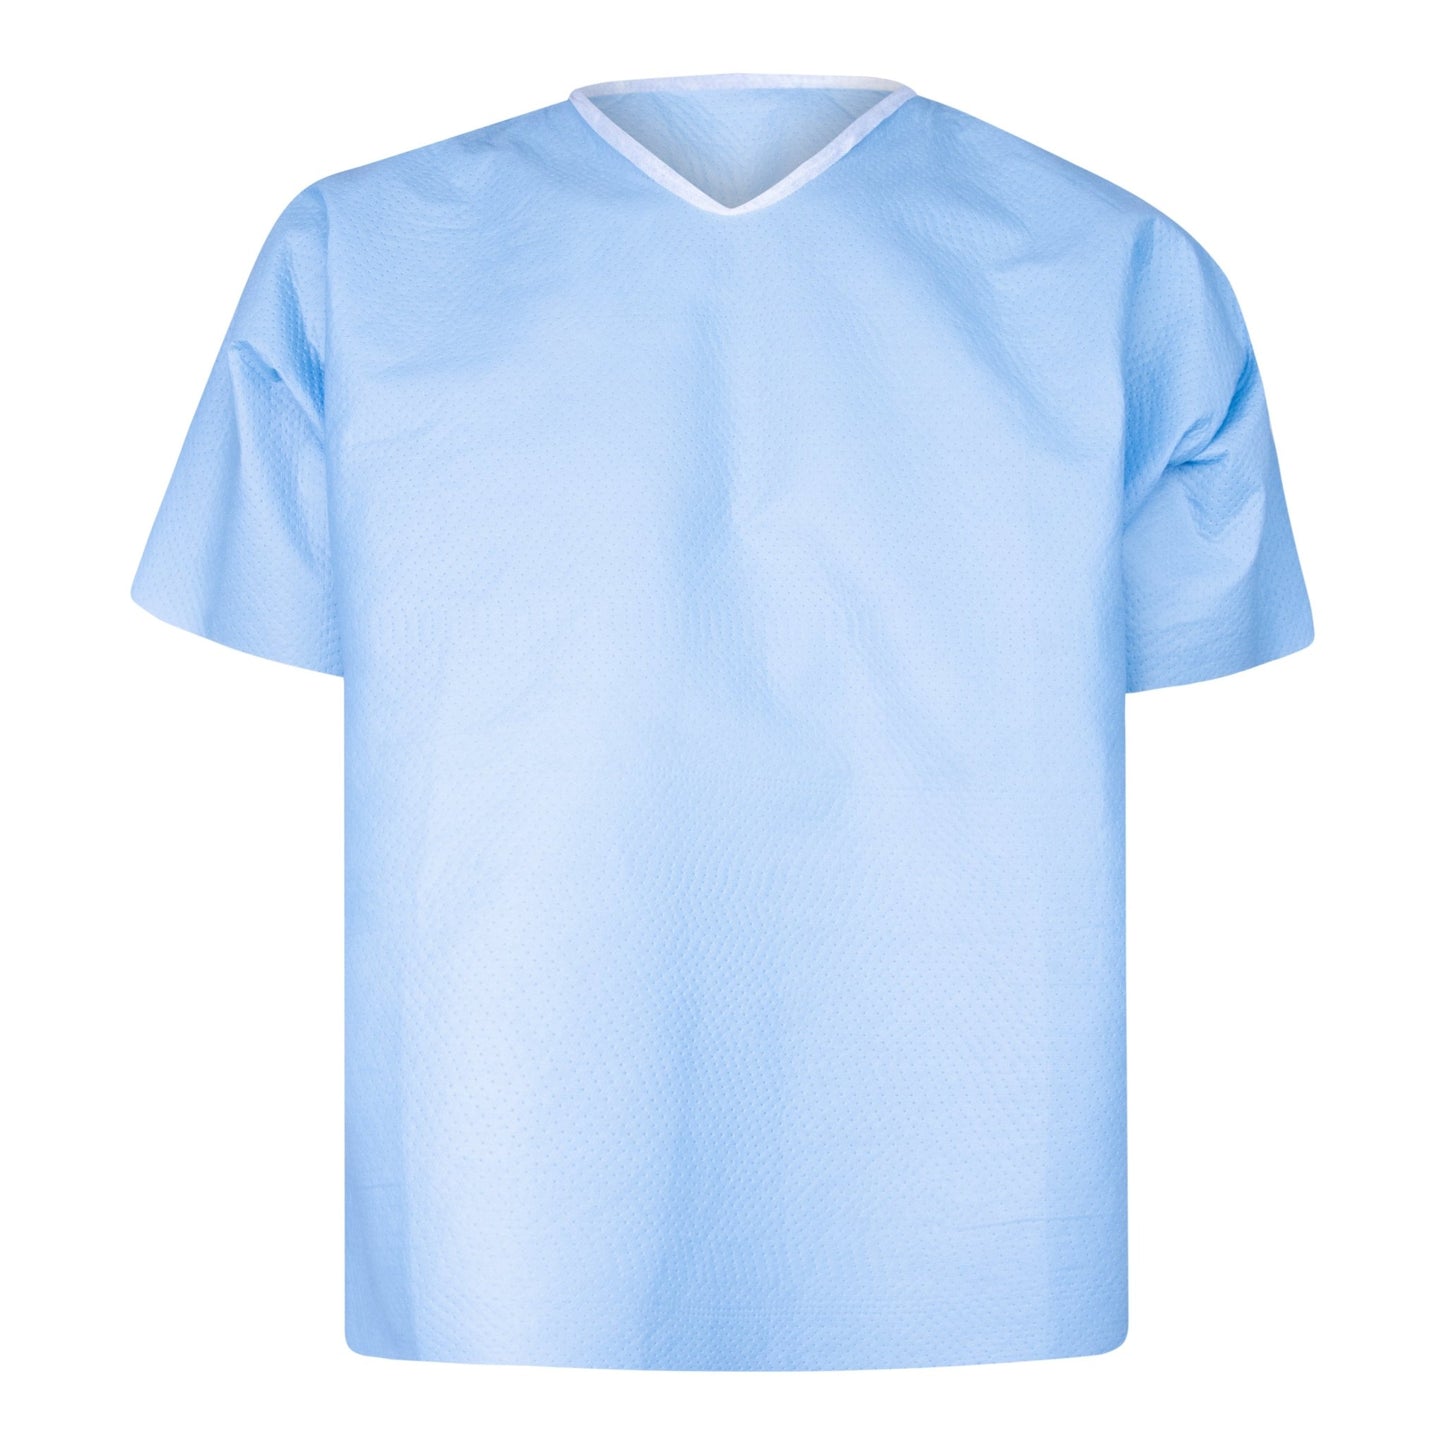 Disposable Scrubs - 30 Pack - DisposableGowns.com